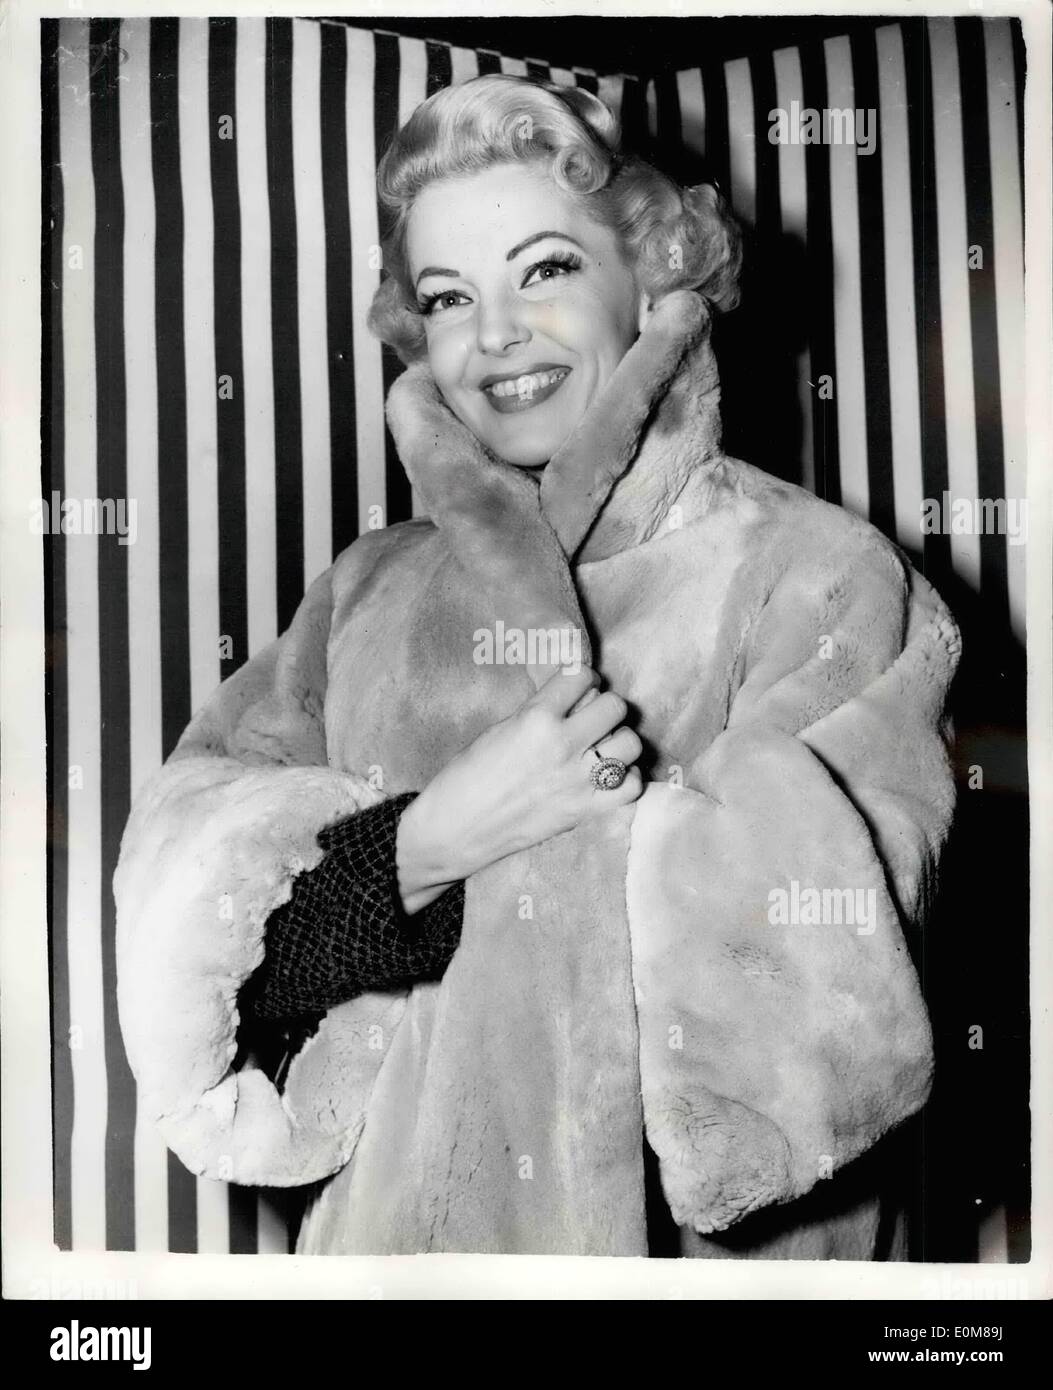 Dec. 12, 1953 - Vivian Blaine's New Year Gift From Husband Is A Blonde Otter Coat: Vivian Blaine, the star of ''Guys and Dolls'' has received a New Year gift from her husband - it is a Blonde Otter coat, claimed to be the only one of its kind in this country, and which is valued at 3000. Photo shows Vivian Blaine wearing her New Year gift Blonde Otter Coat - at the Coliseum this evening. Stock Photo